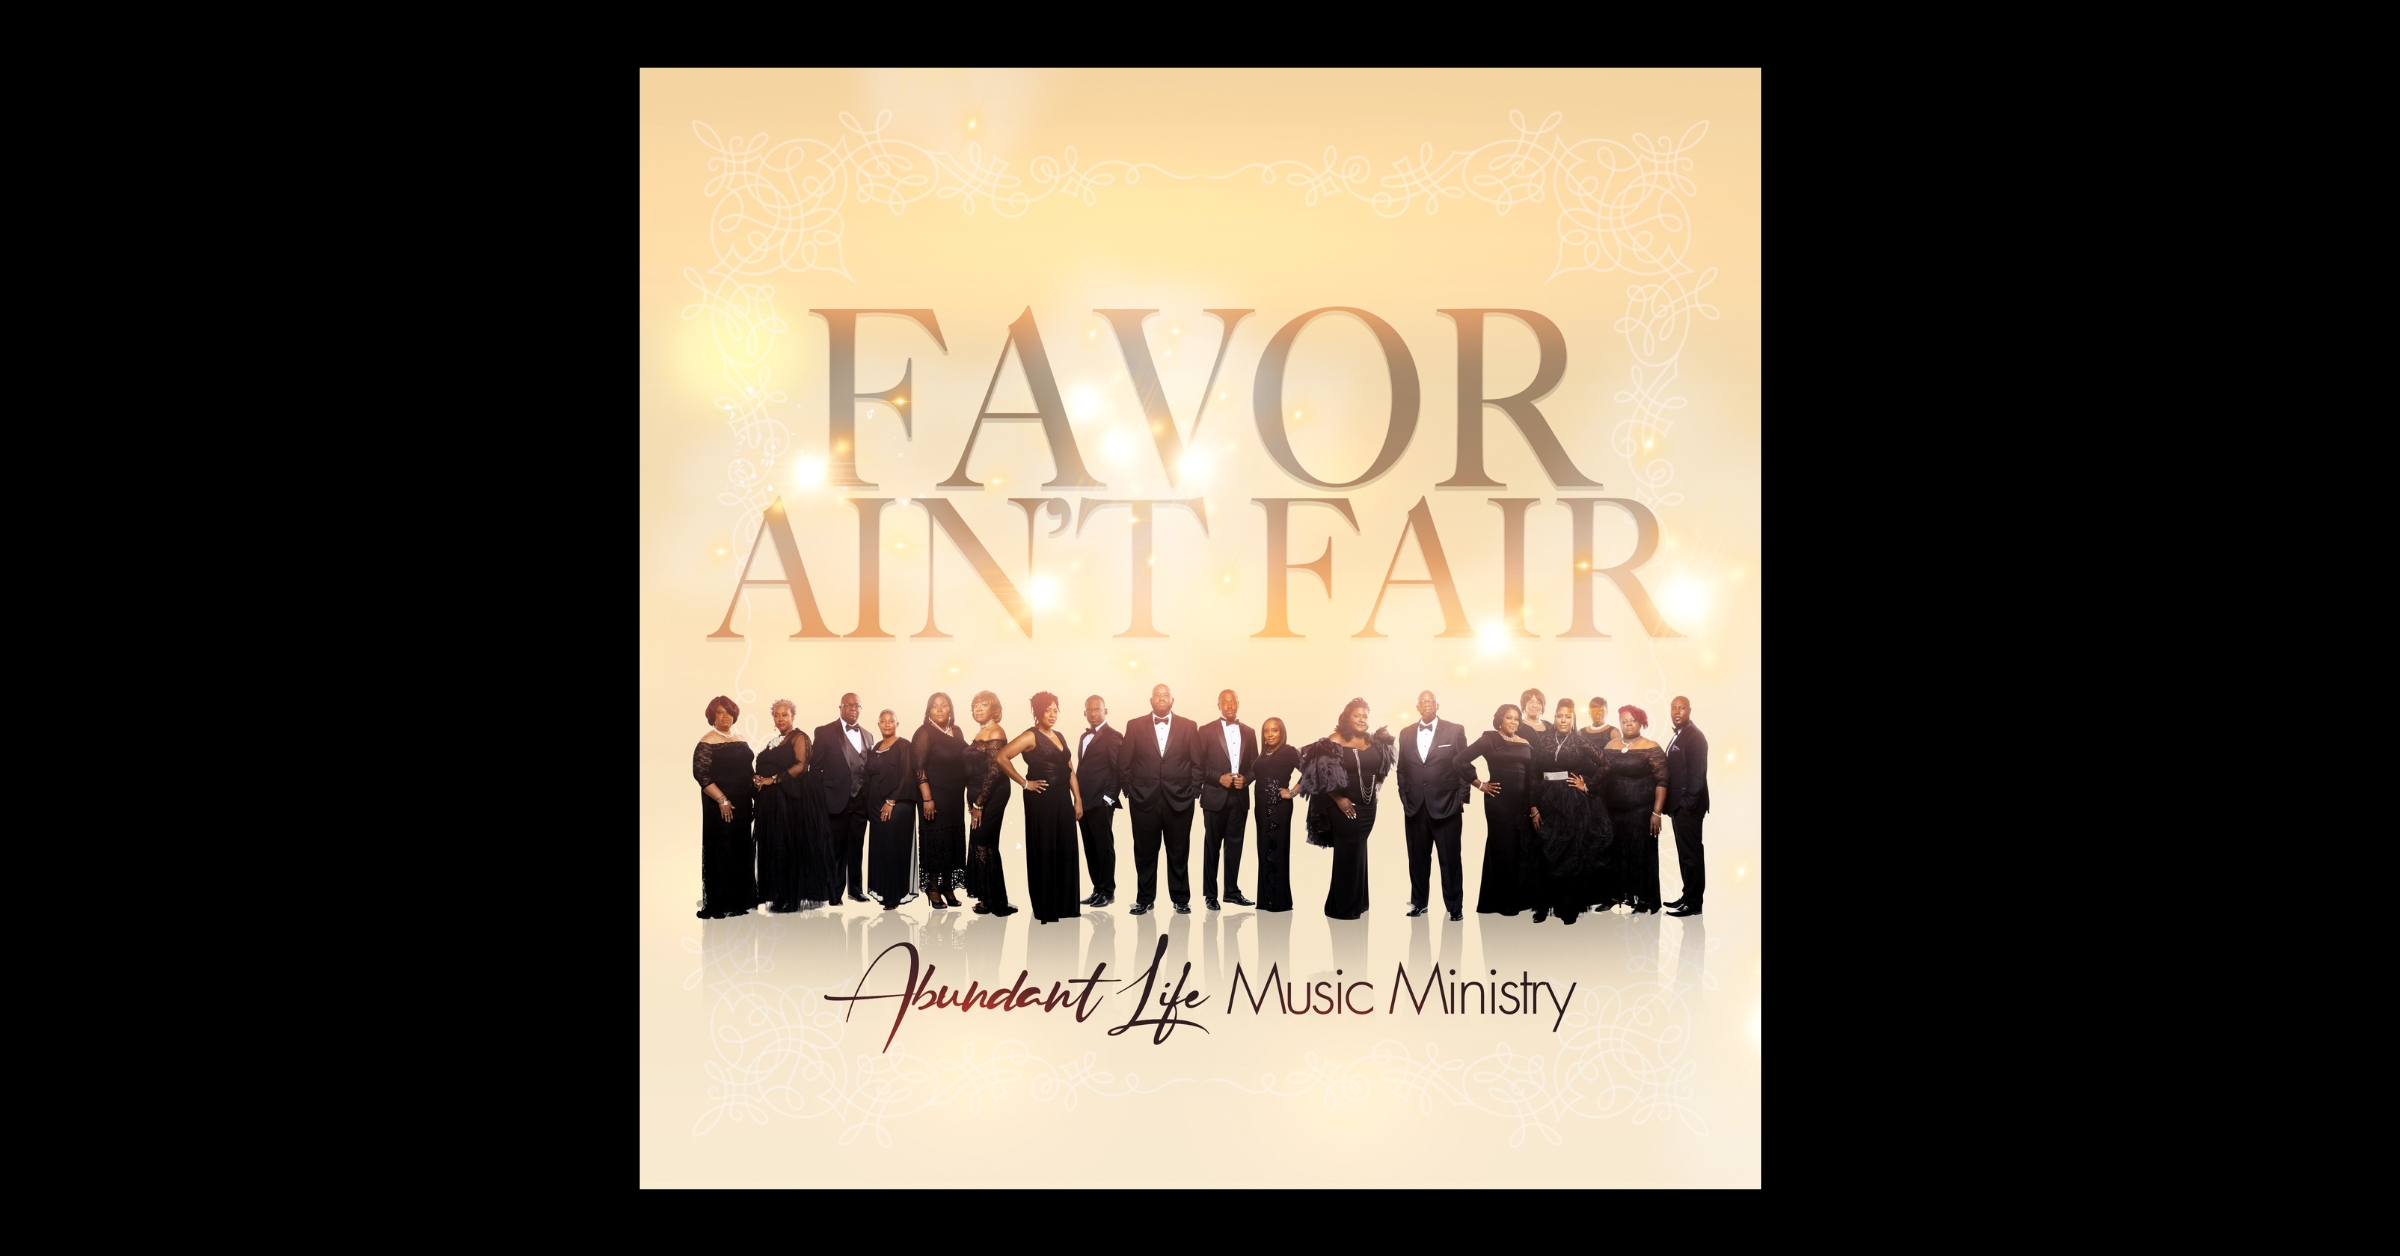 Abundant Life celebrates 30 years in music ministry, releases new project